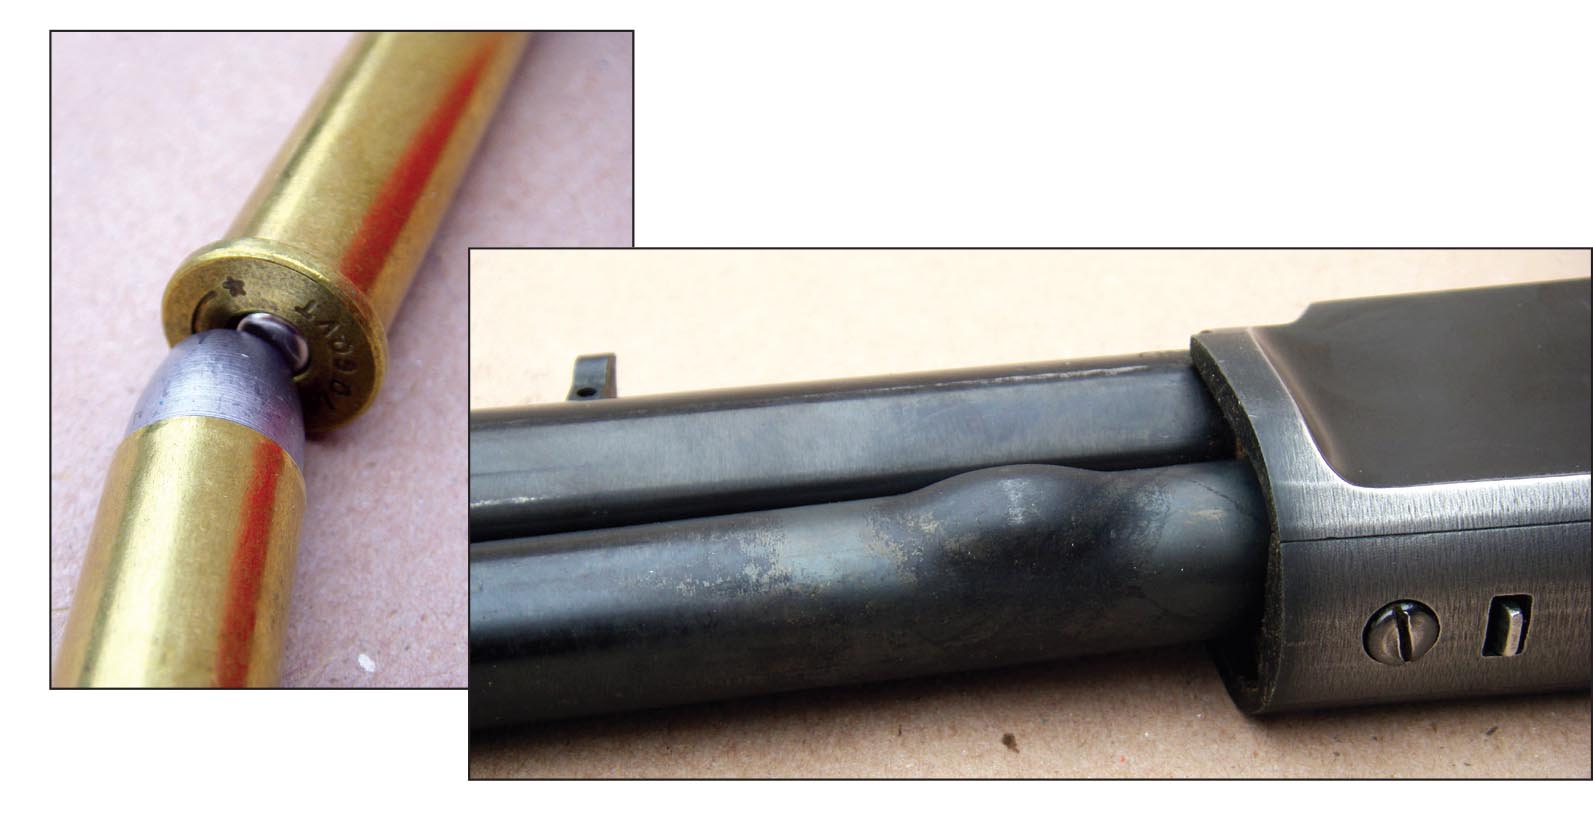 When certain flatnose bullets are loaded in a Marlin magazine tube’s “belly,” they can be positioned to allow the flatpoint “edge” to contact the primer. Above, the bulge was caused by detonation.